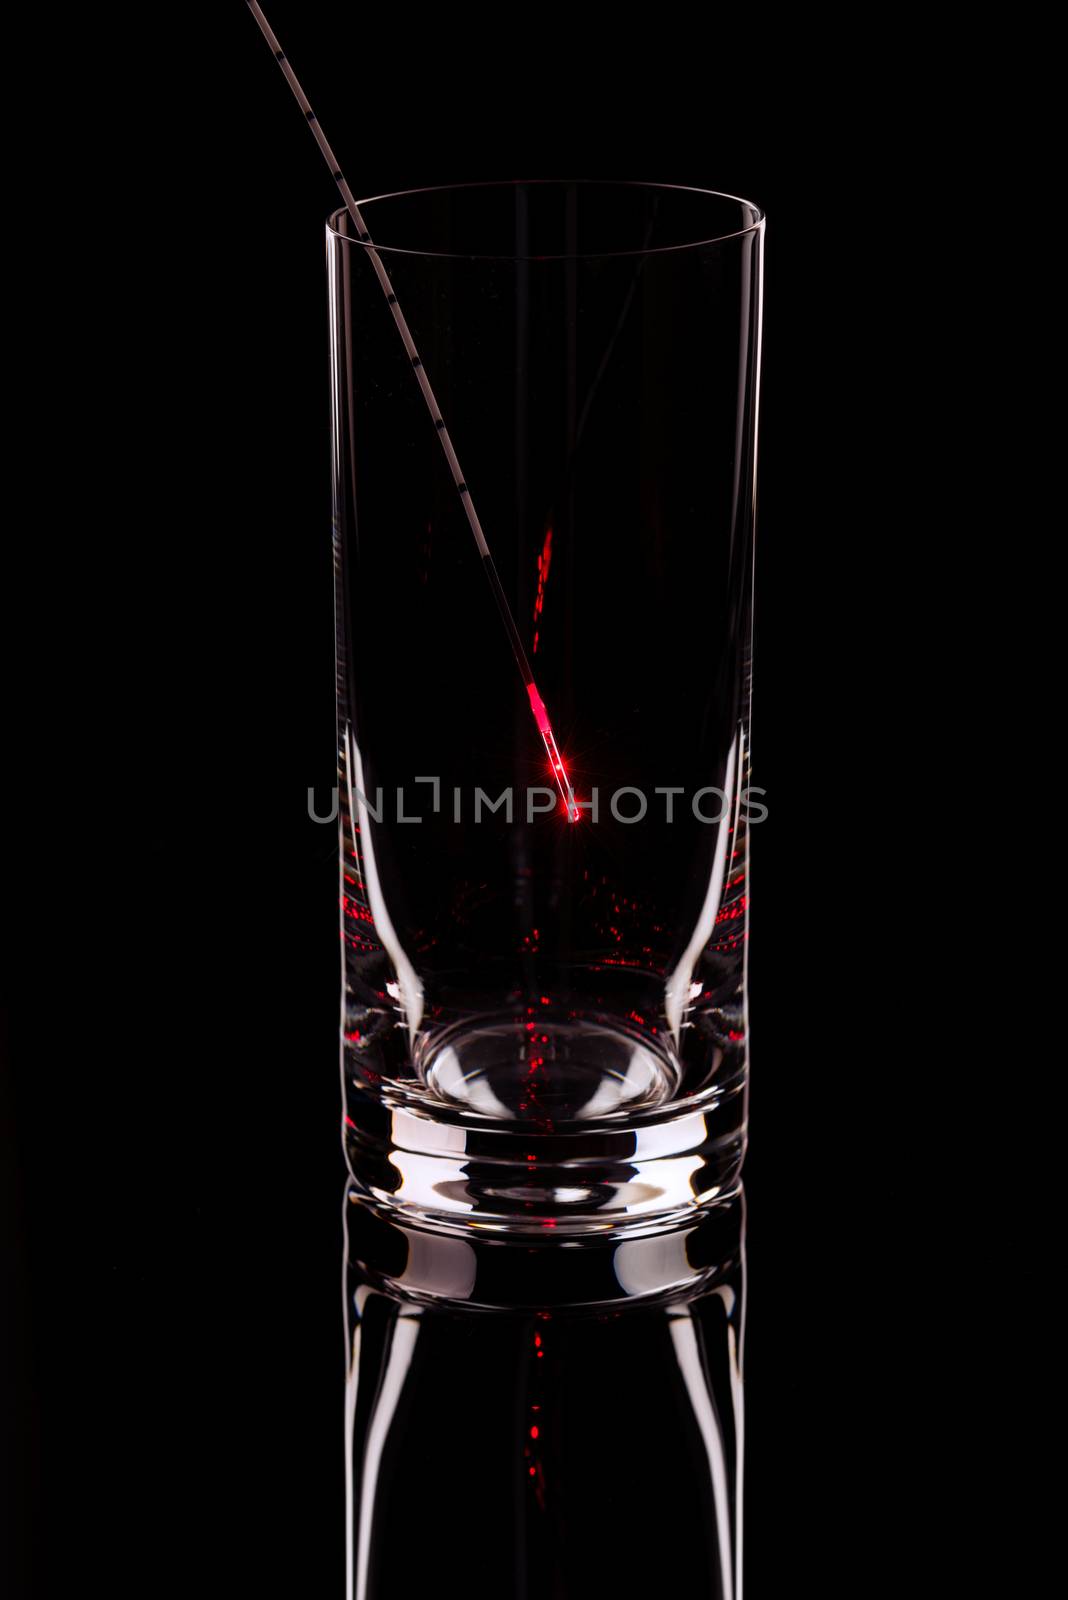 The shining probe in an empty glass on a black background